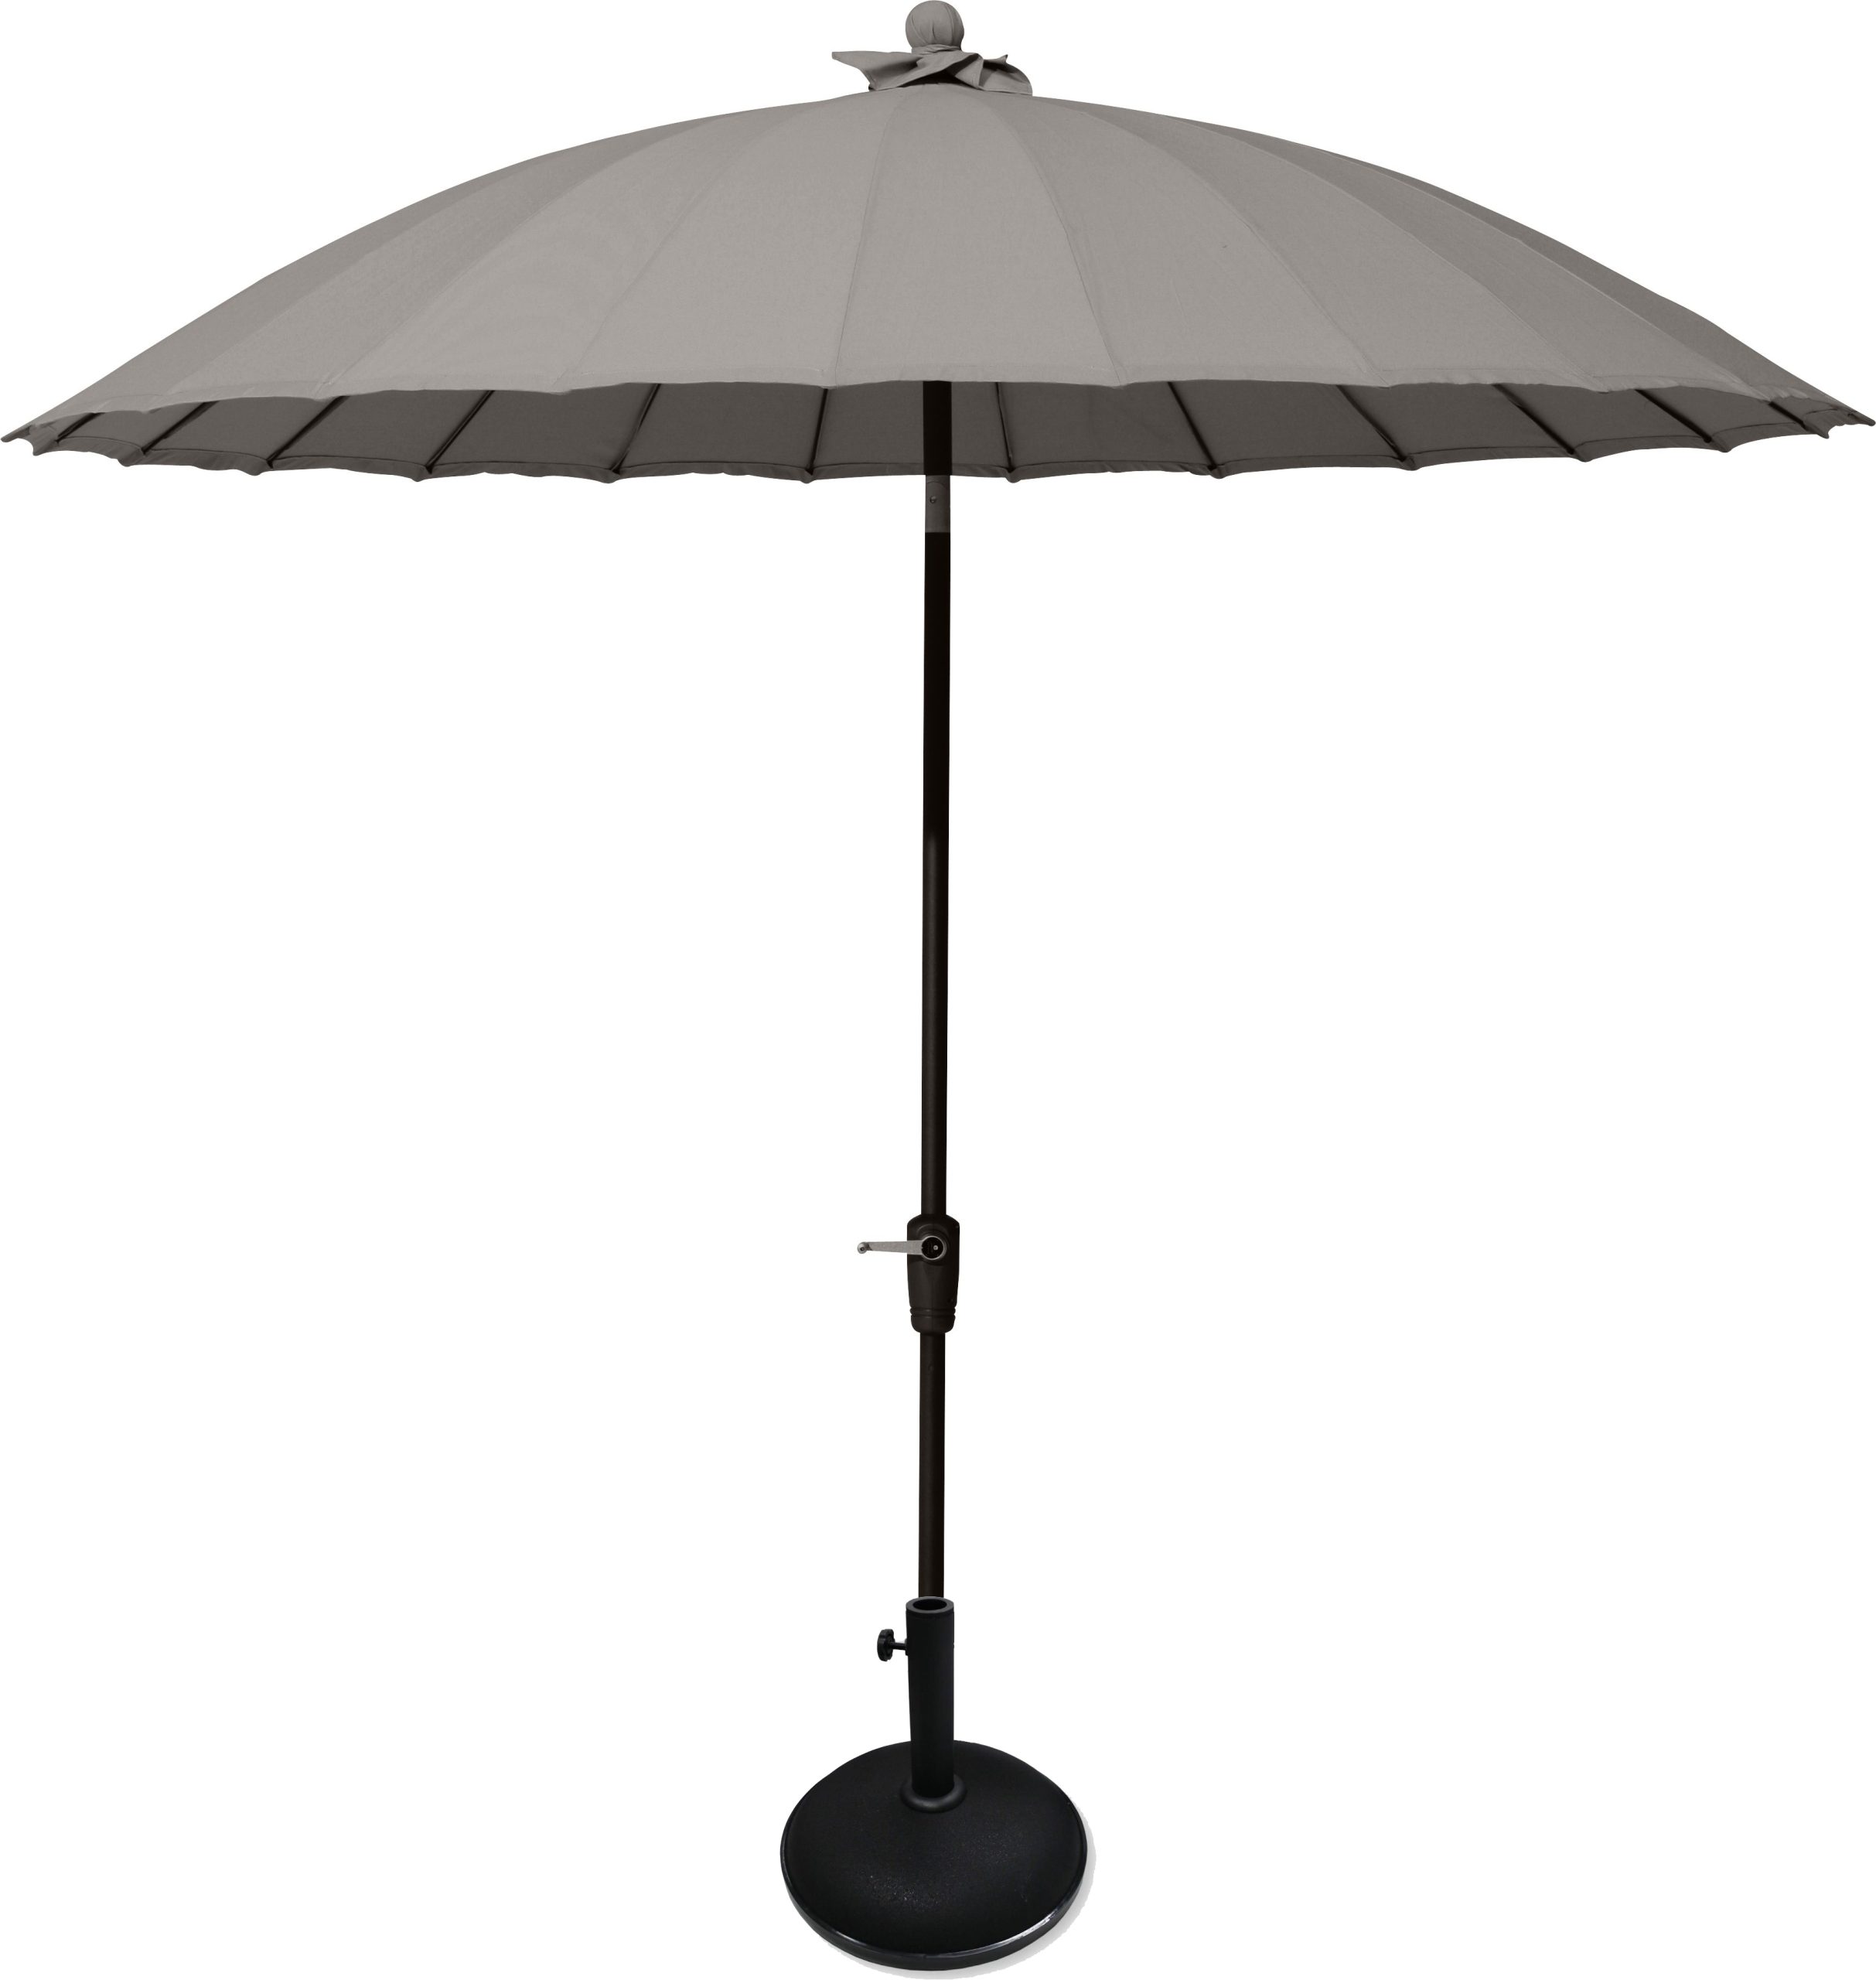 4 Seasons Outdoor 3m Taupe Shanghai Parasol and Parasol Base by 4 Seasons Outdoor